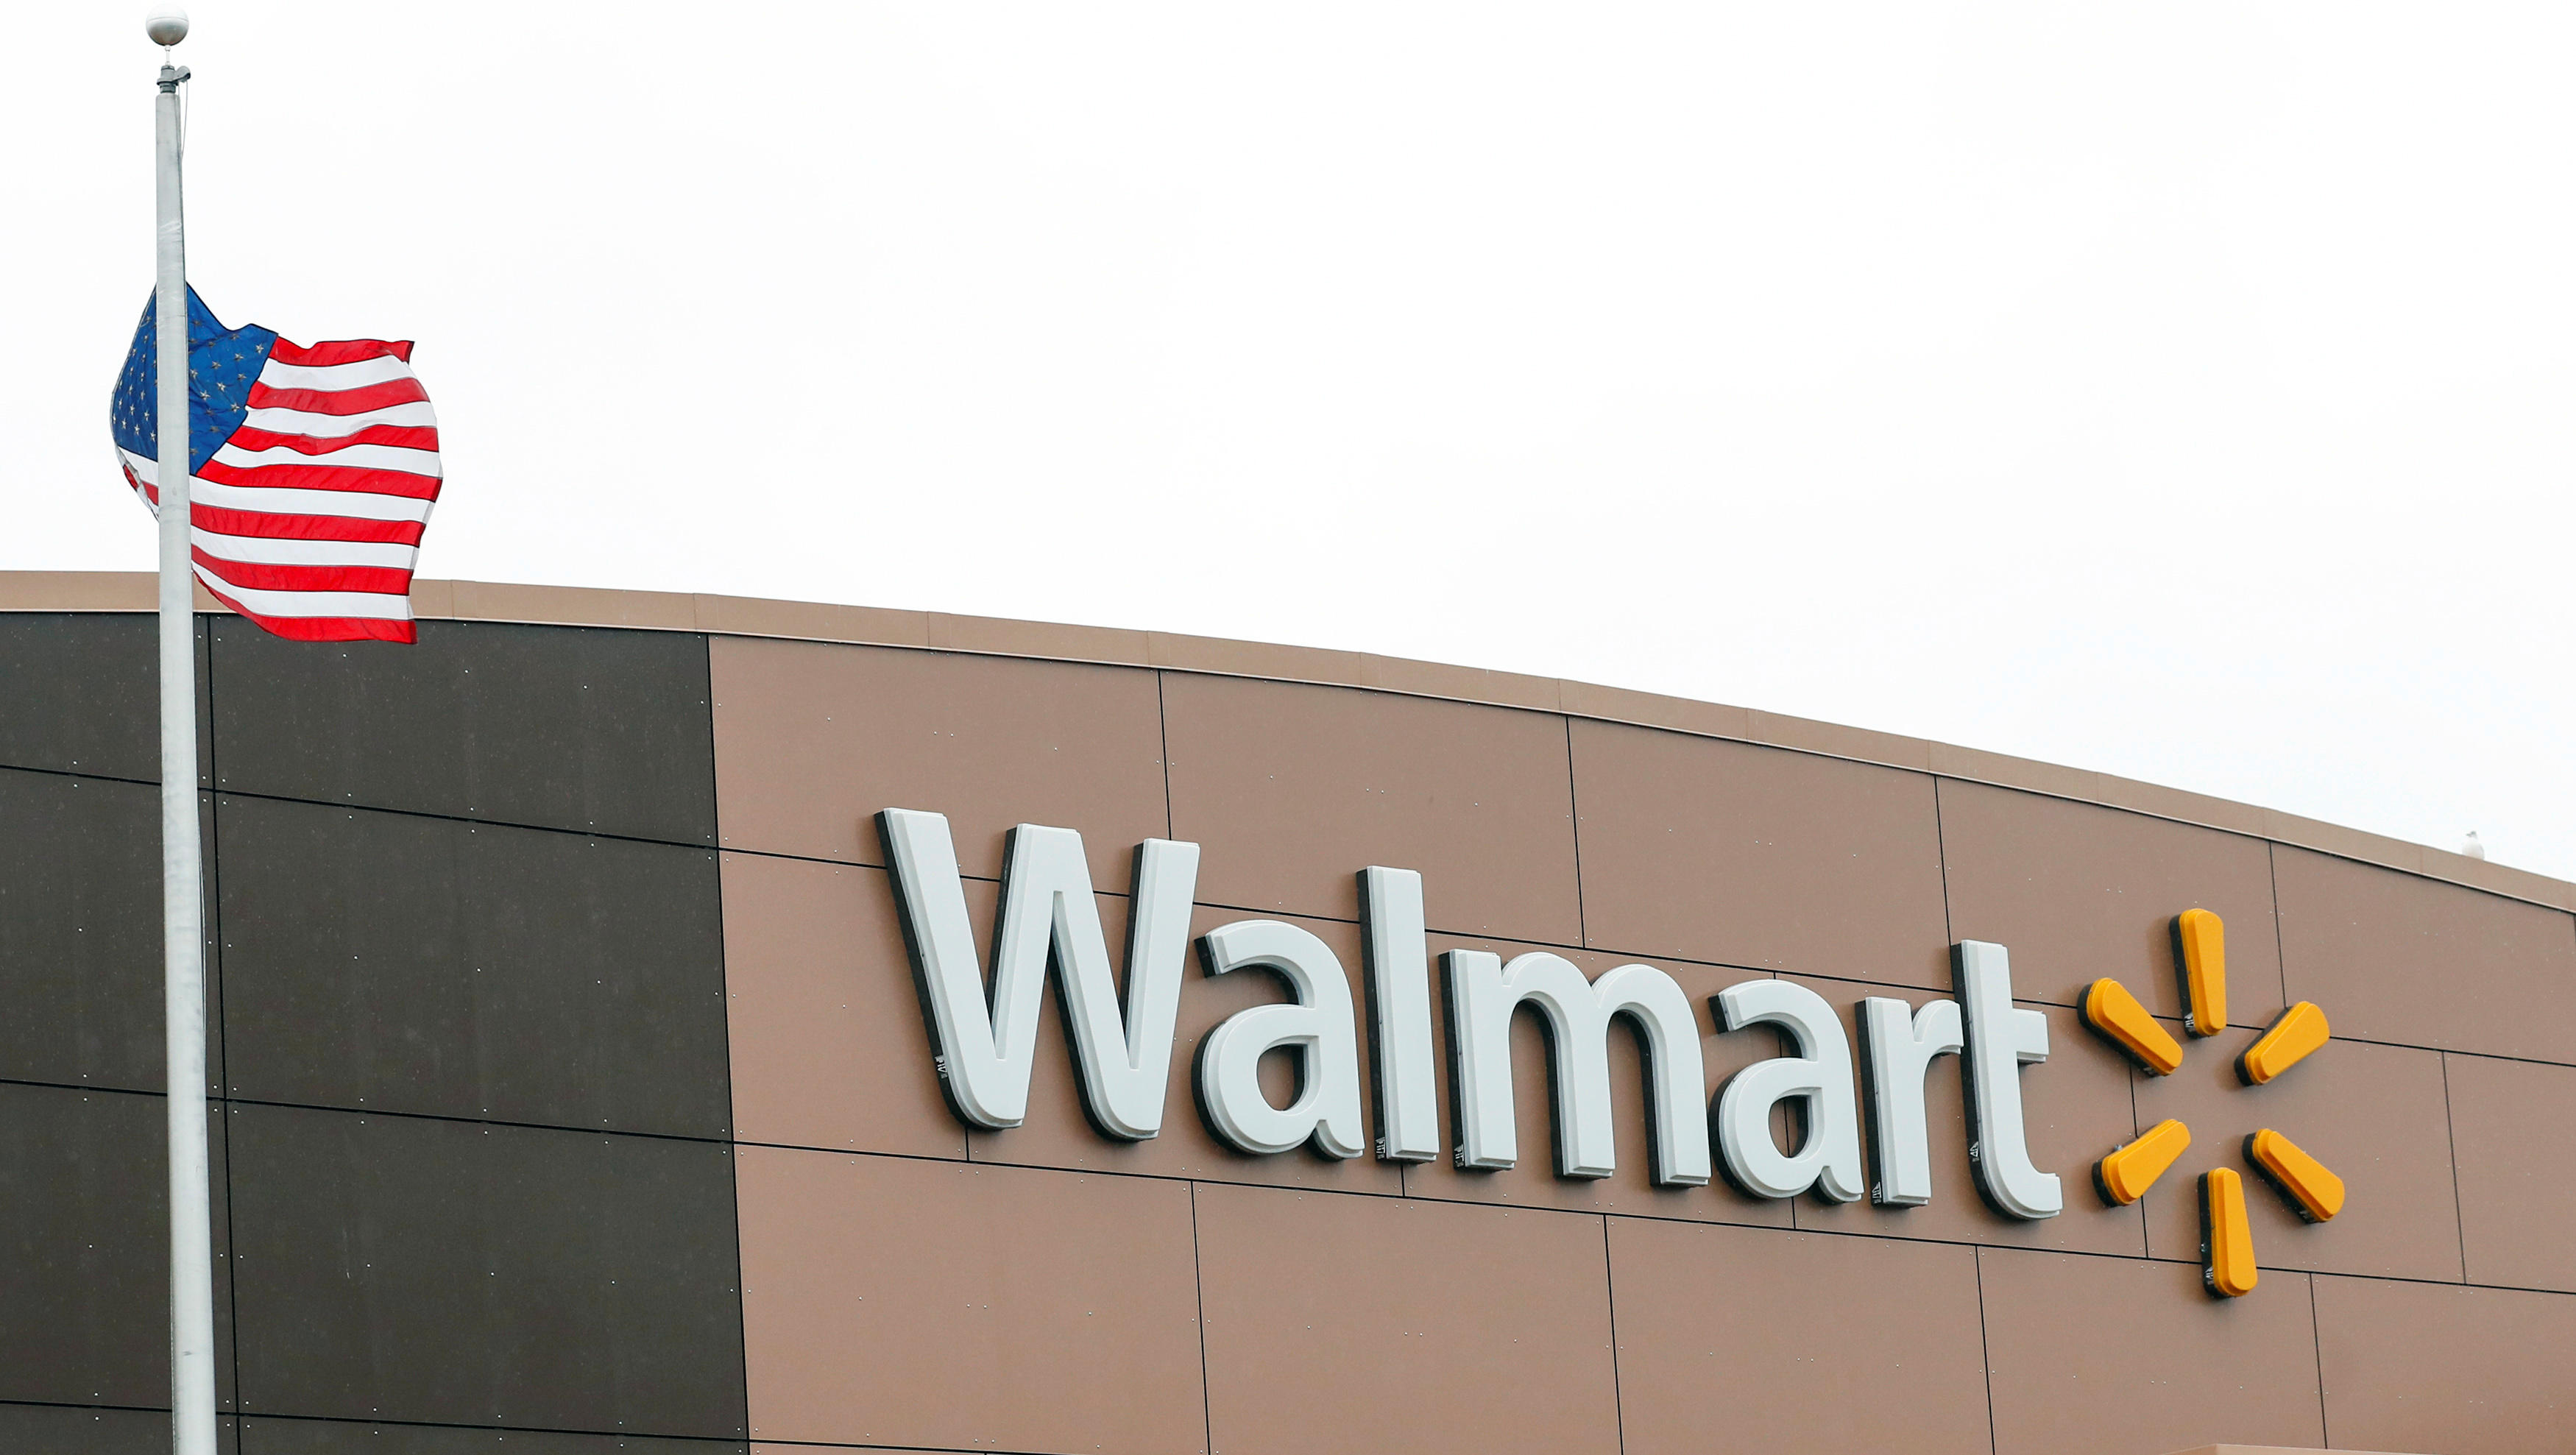 Walmart patents audio surveillance technology to record customers and ...